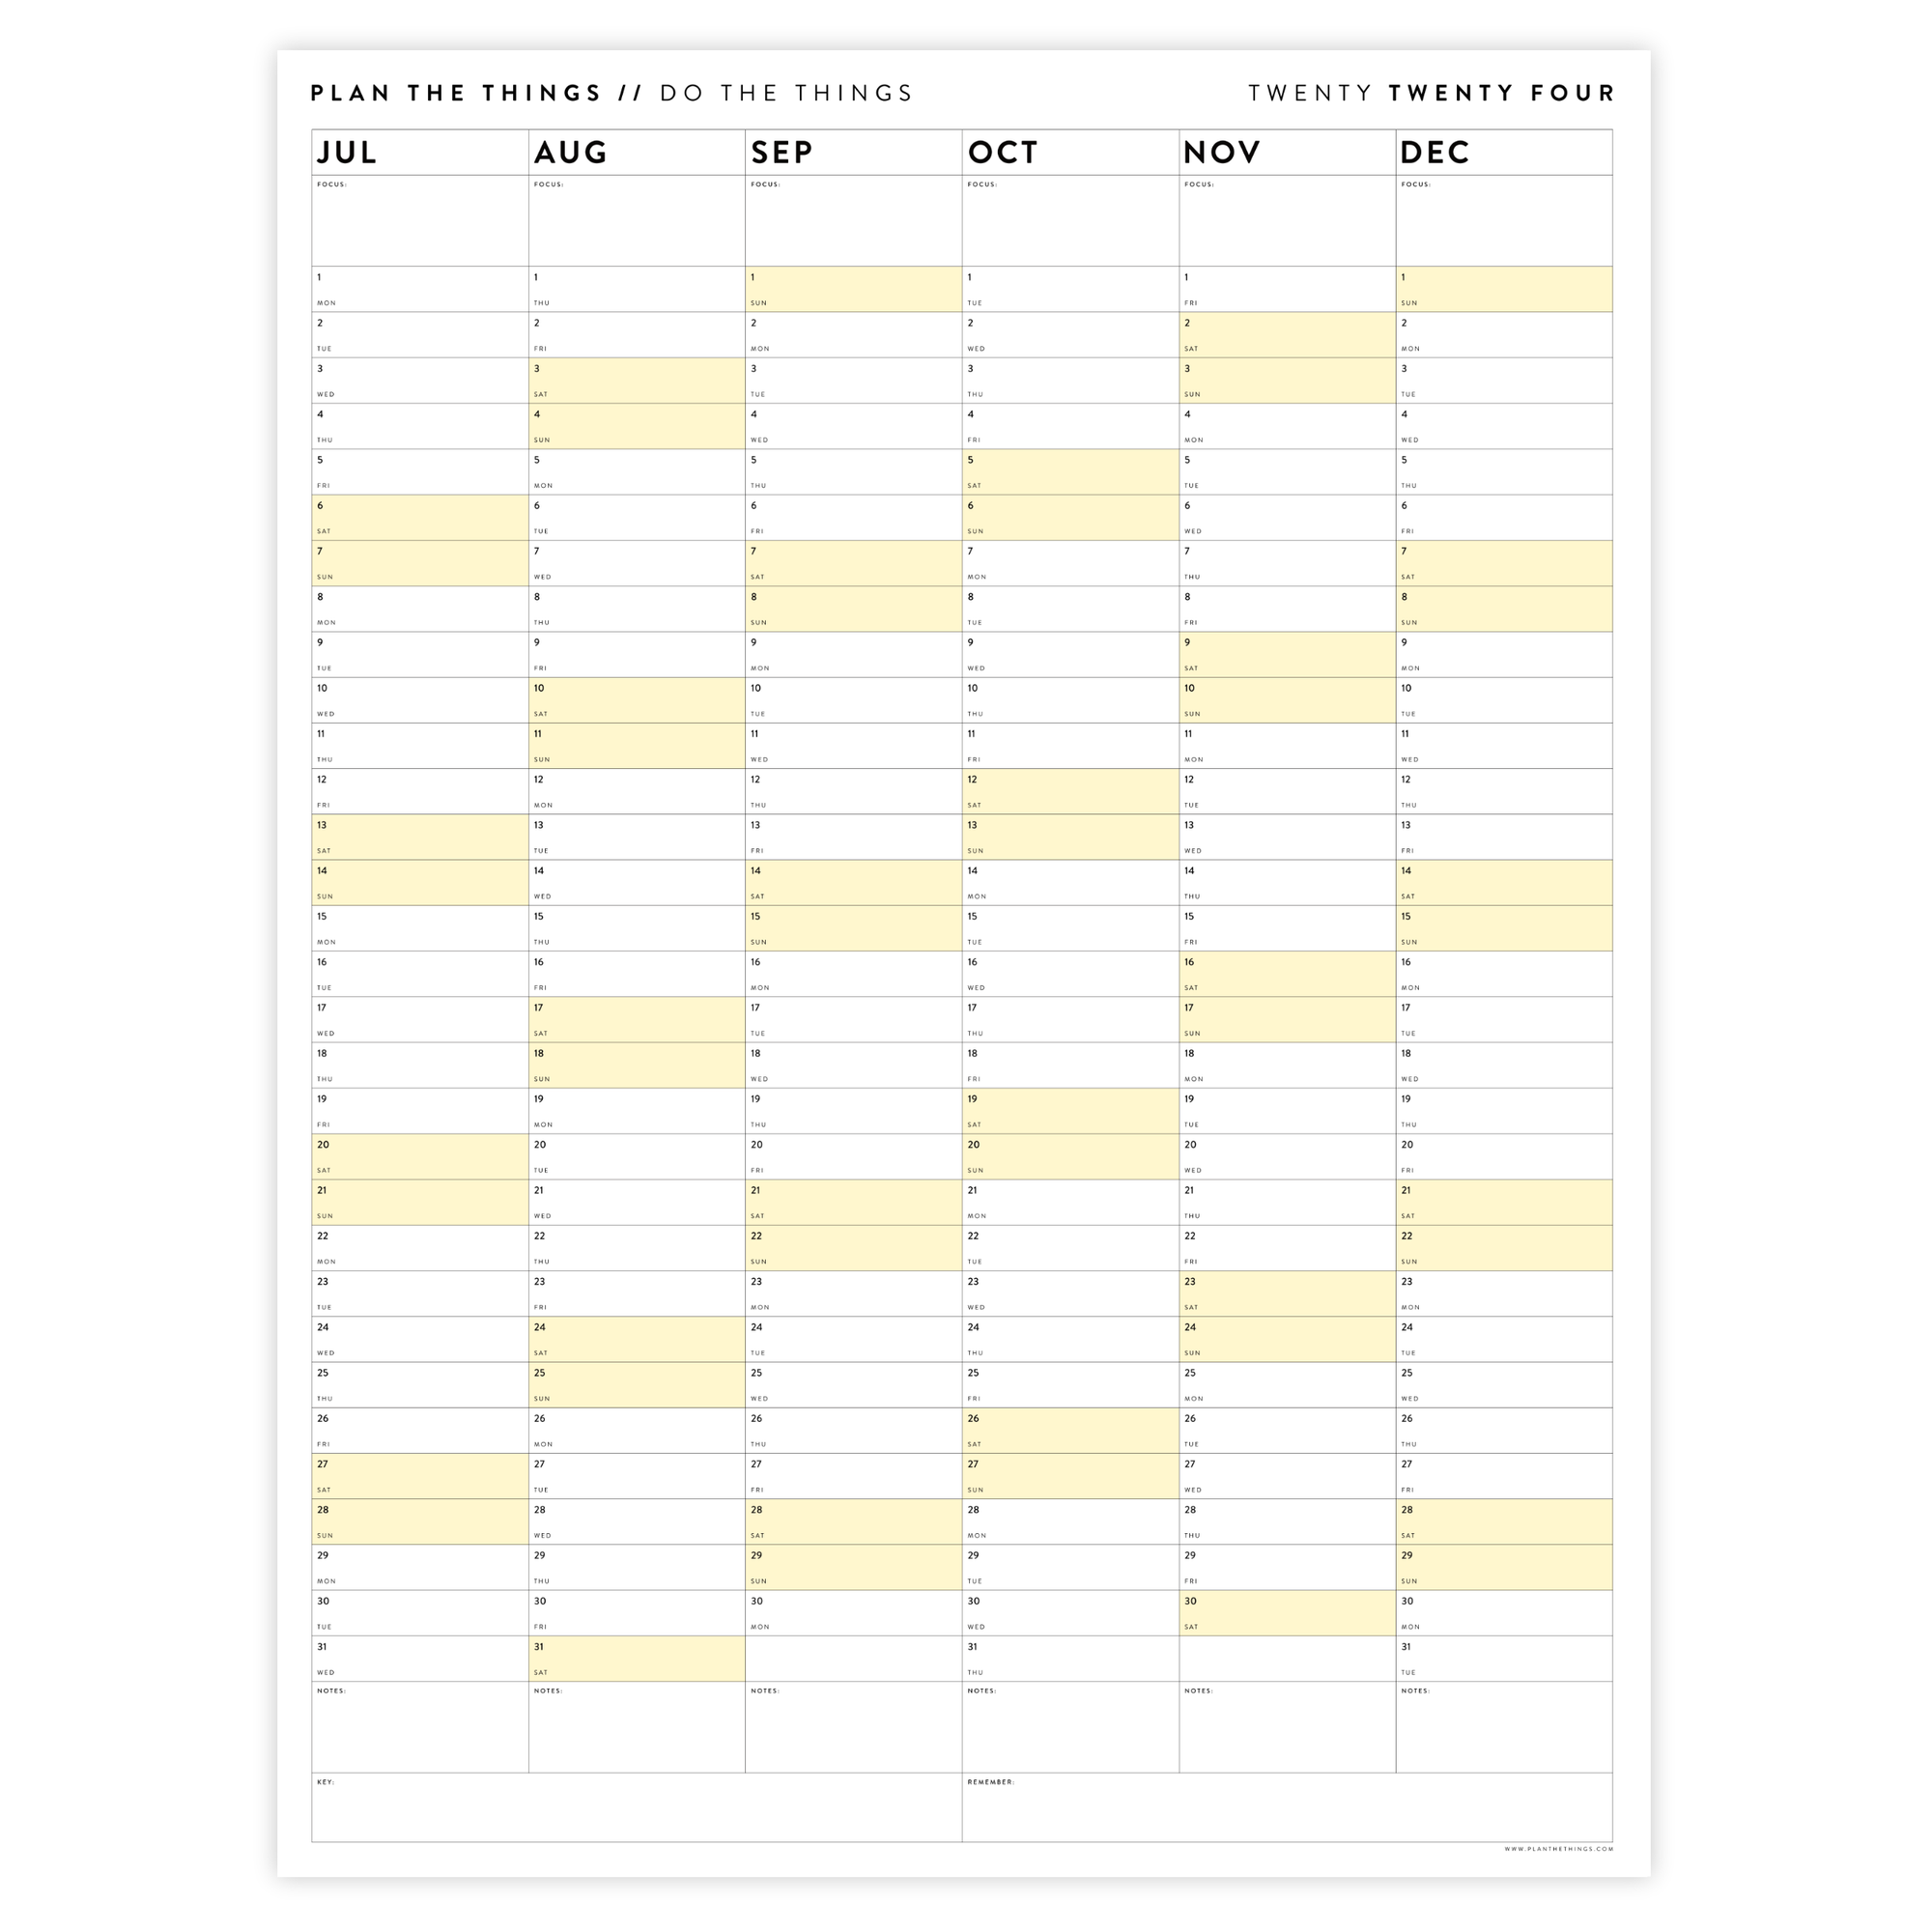 PRINTABLE SIX MONTH 2024 WALL CALENDAR (JULY TO DECEMBER) WITH YELLOW WEEKENDS - INSTANT DOWNLOAD